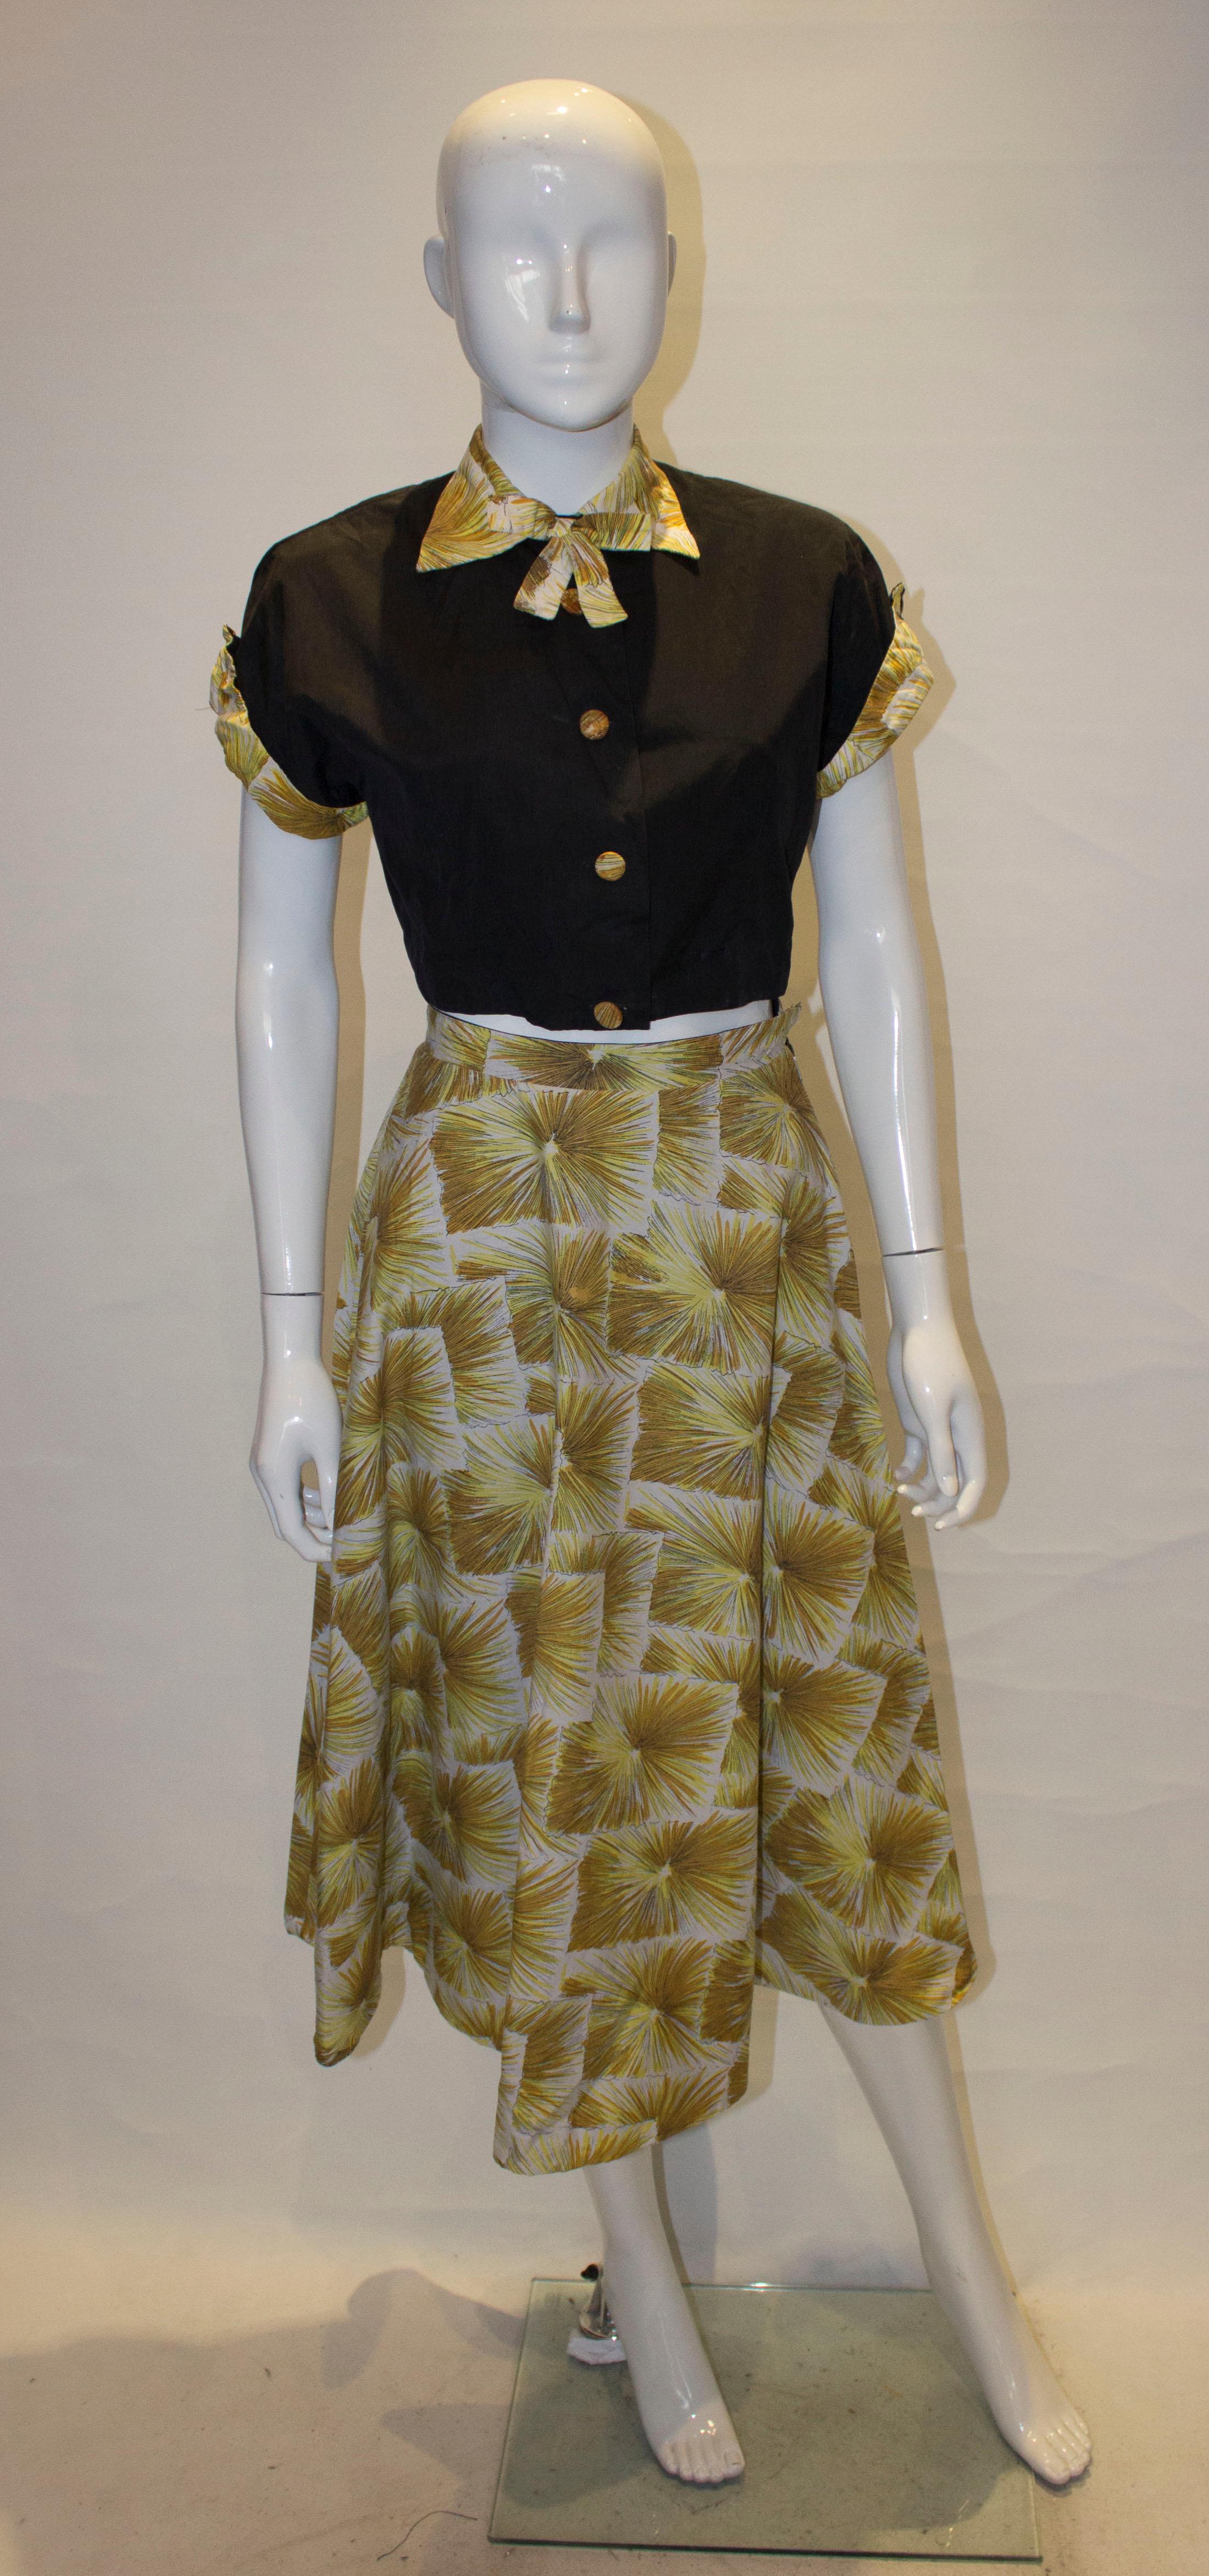 A vintage outfit with the benefit of a reversible skirt.  The skirt is black on one side and print on the  other.  The top is black with print covered buttons and collar. 
Measurements: Skirt waist 23'', length 32'' Top bust 36'', length 16''